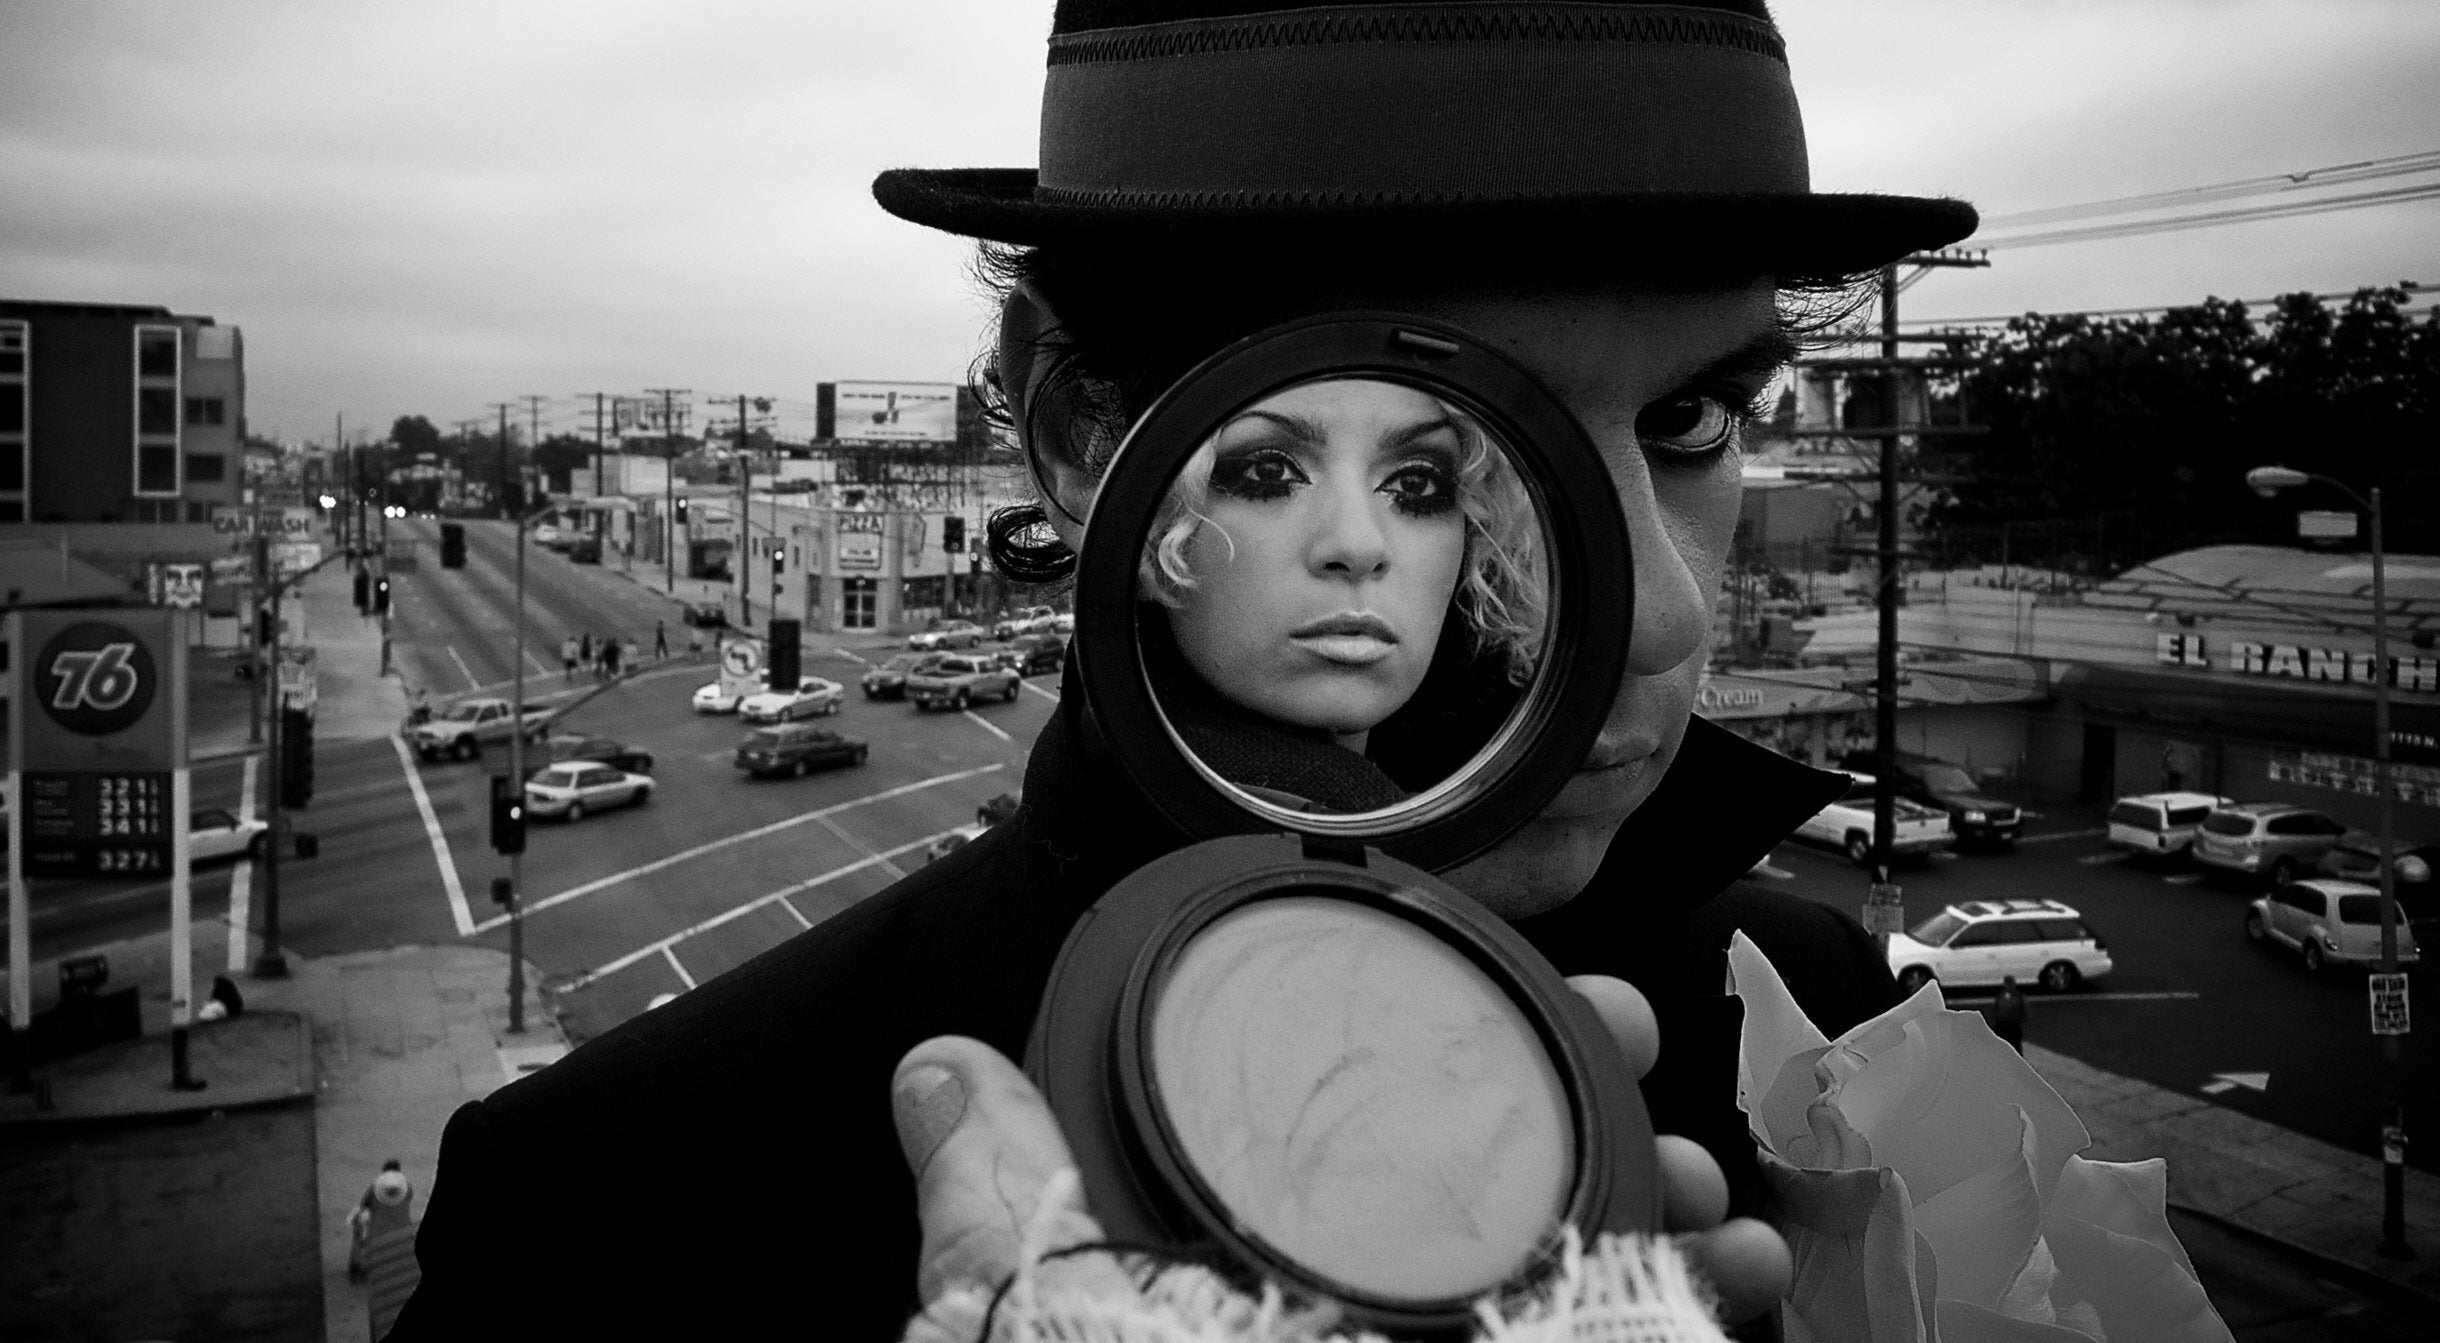 Black and white portrait music duo male band member standing on rooftop wearing hat makeup compact covering one side of his face image of female band member in reflection of mirror busy street in background